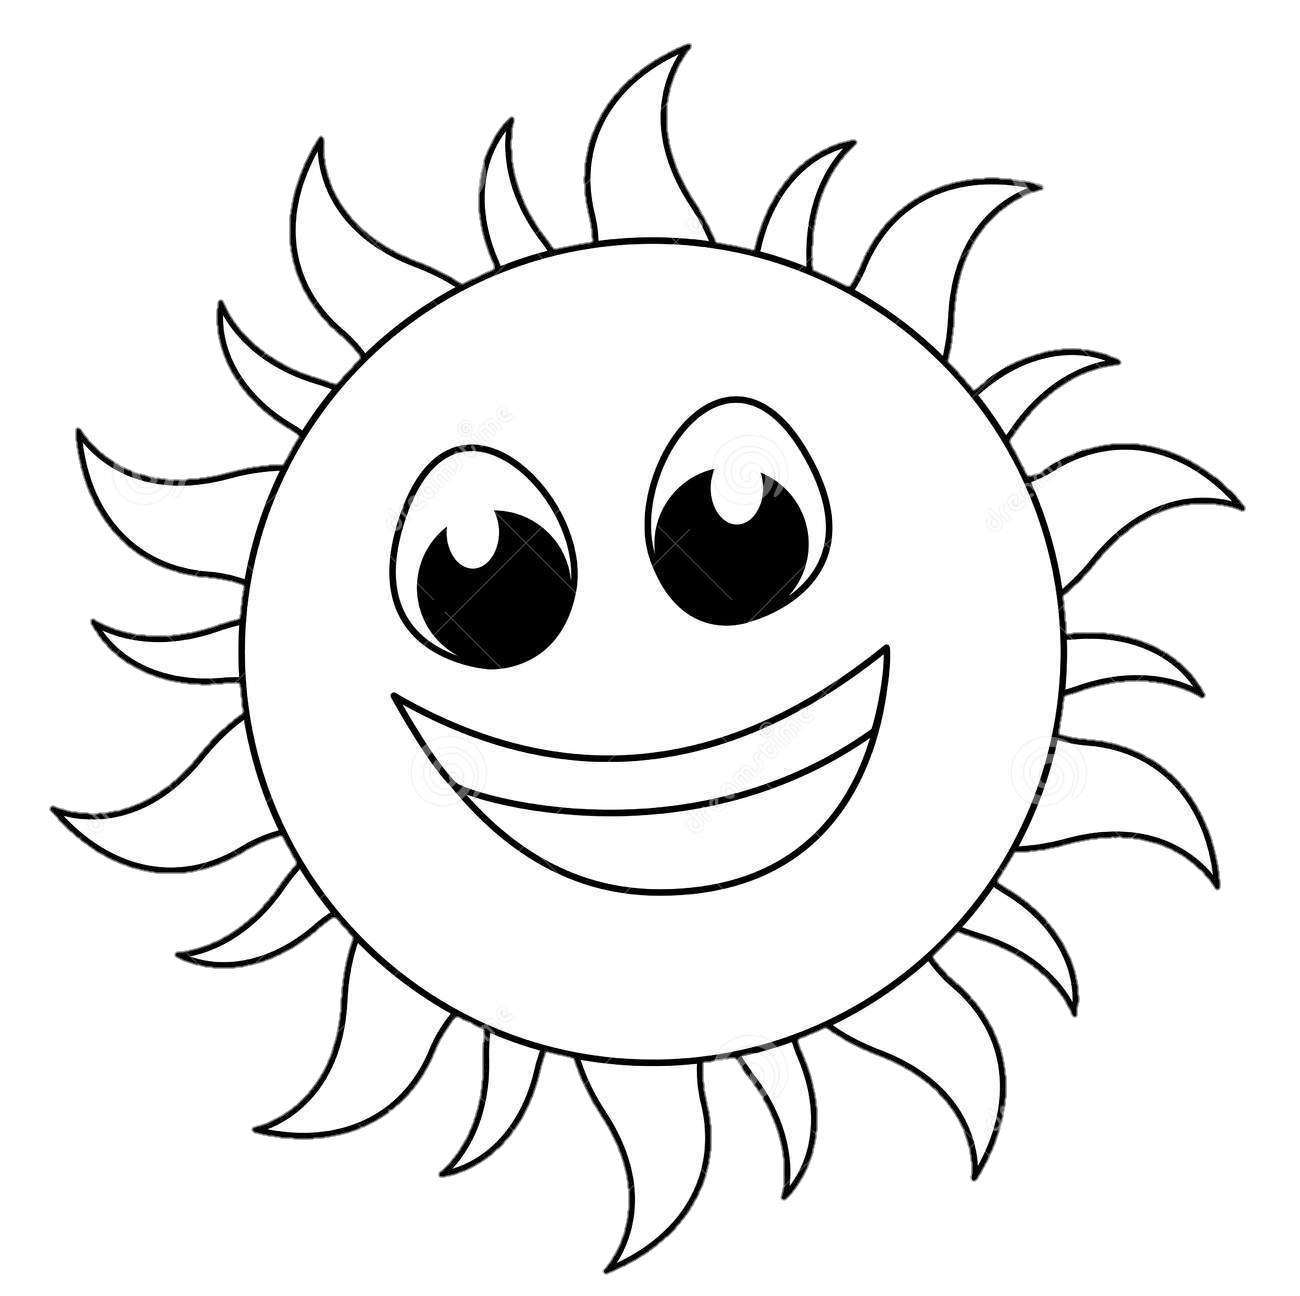 Sun PNG Images Free Download - Pngfre